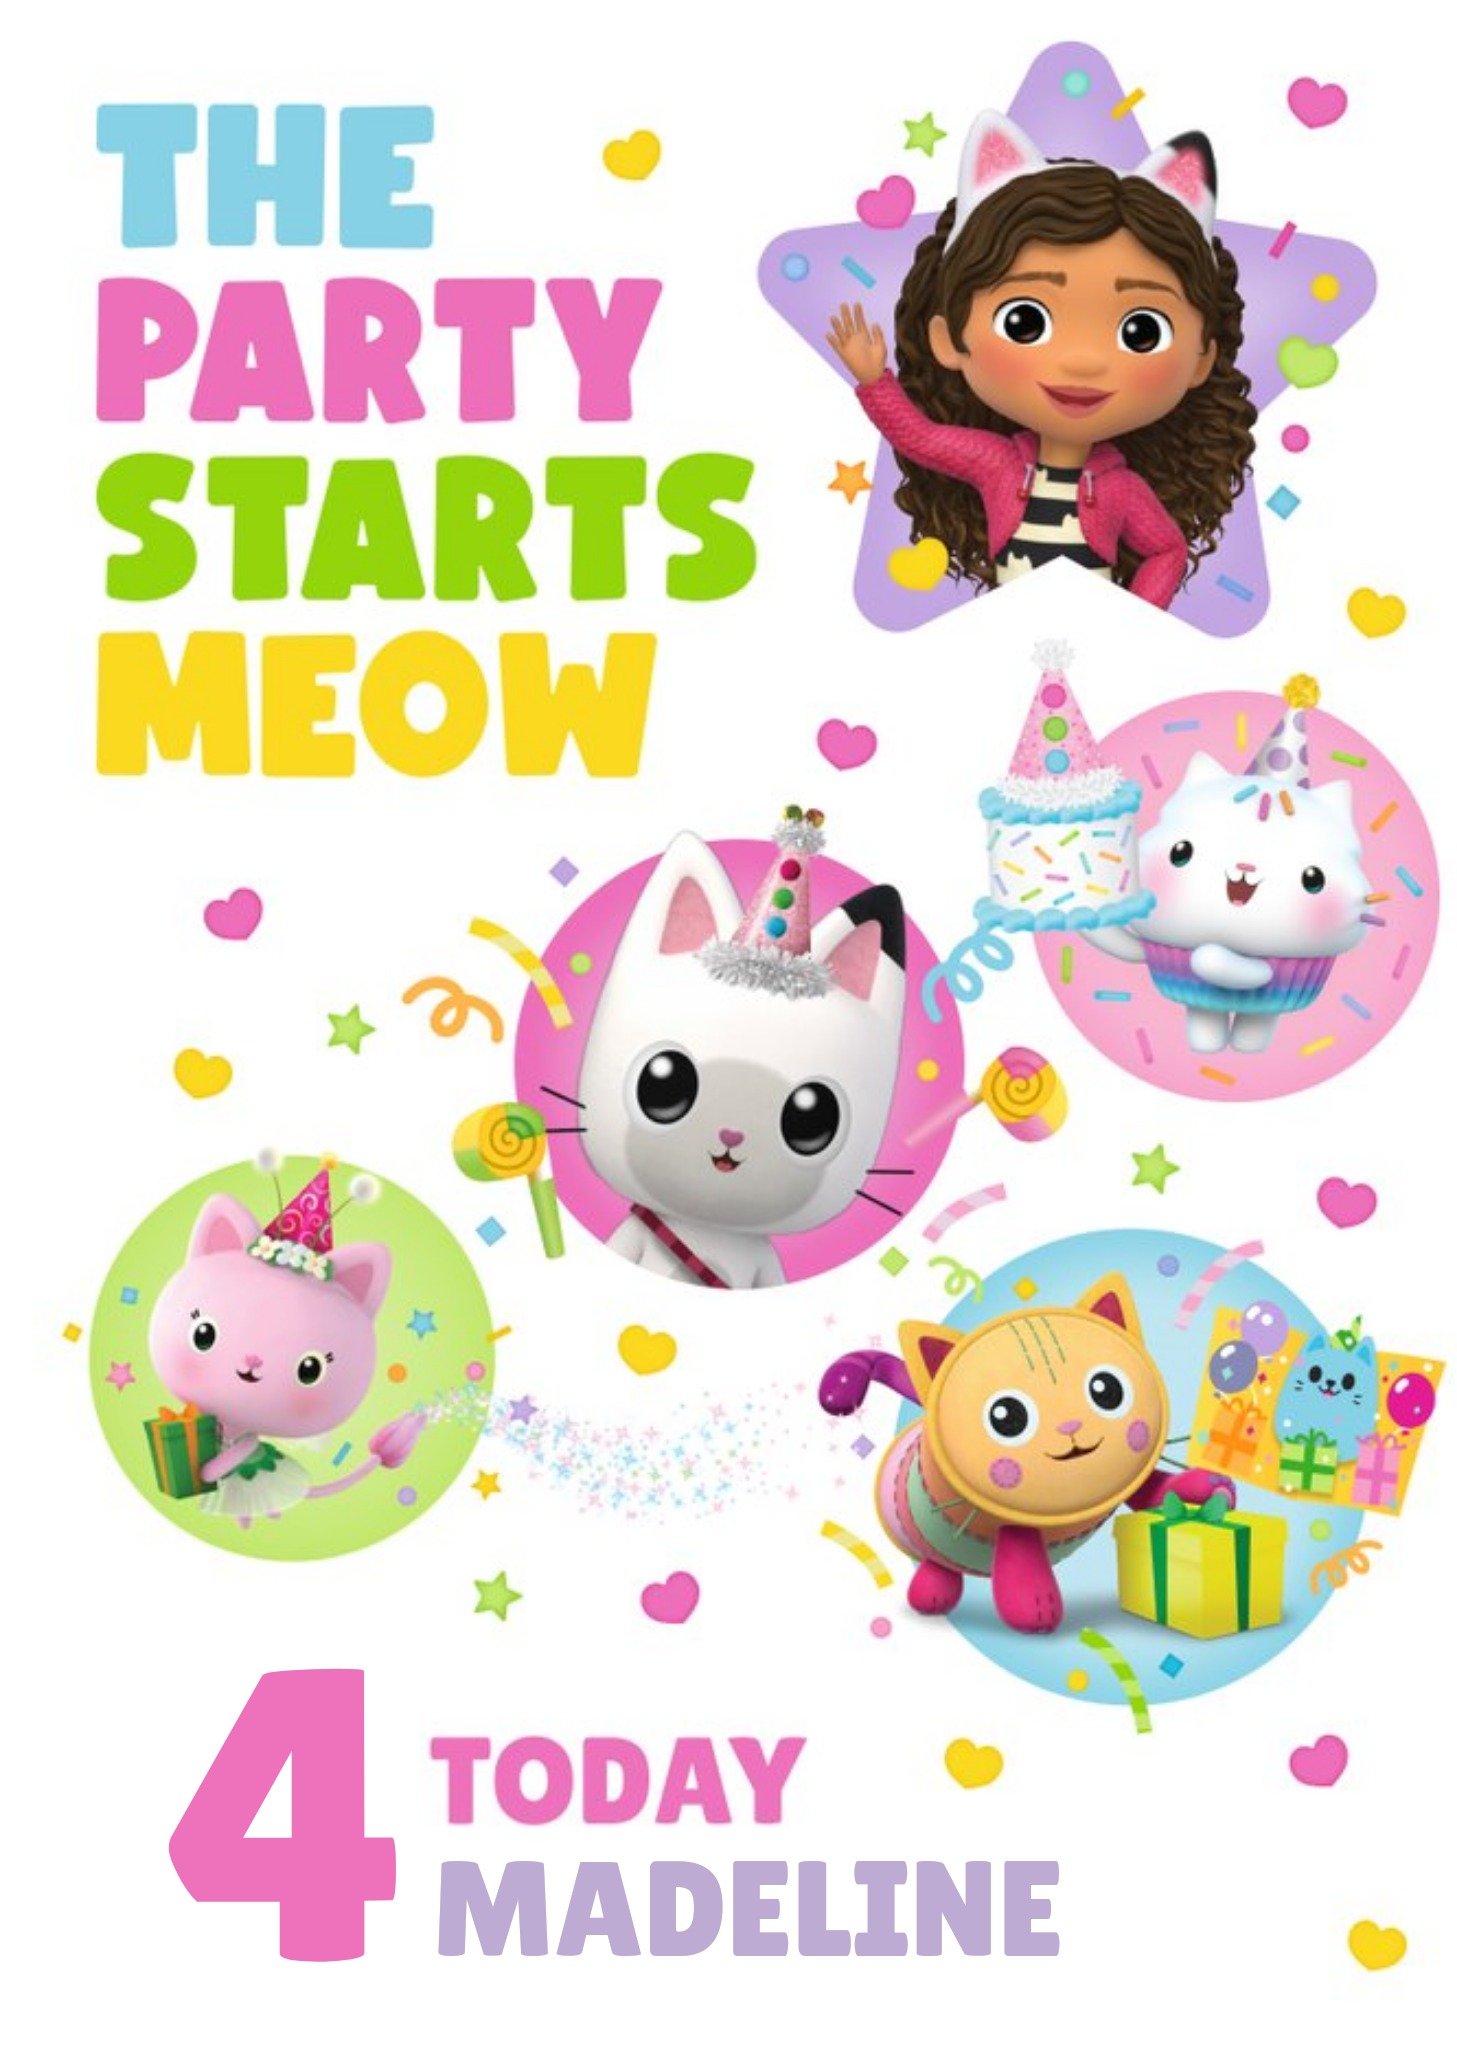 Moonpig Gally's Dollhouse The Party Starts Meow Personalise Age Birthday Card, Large